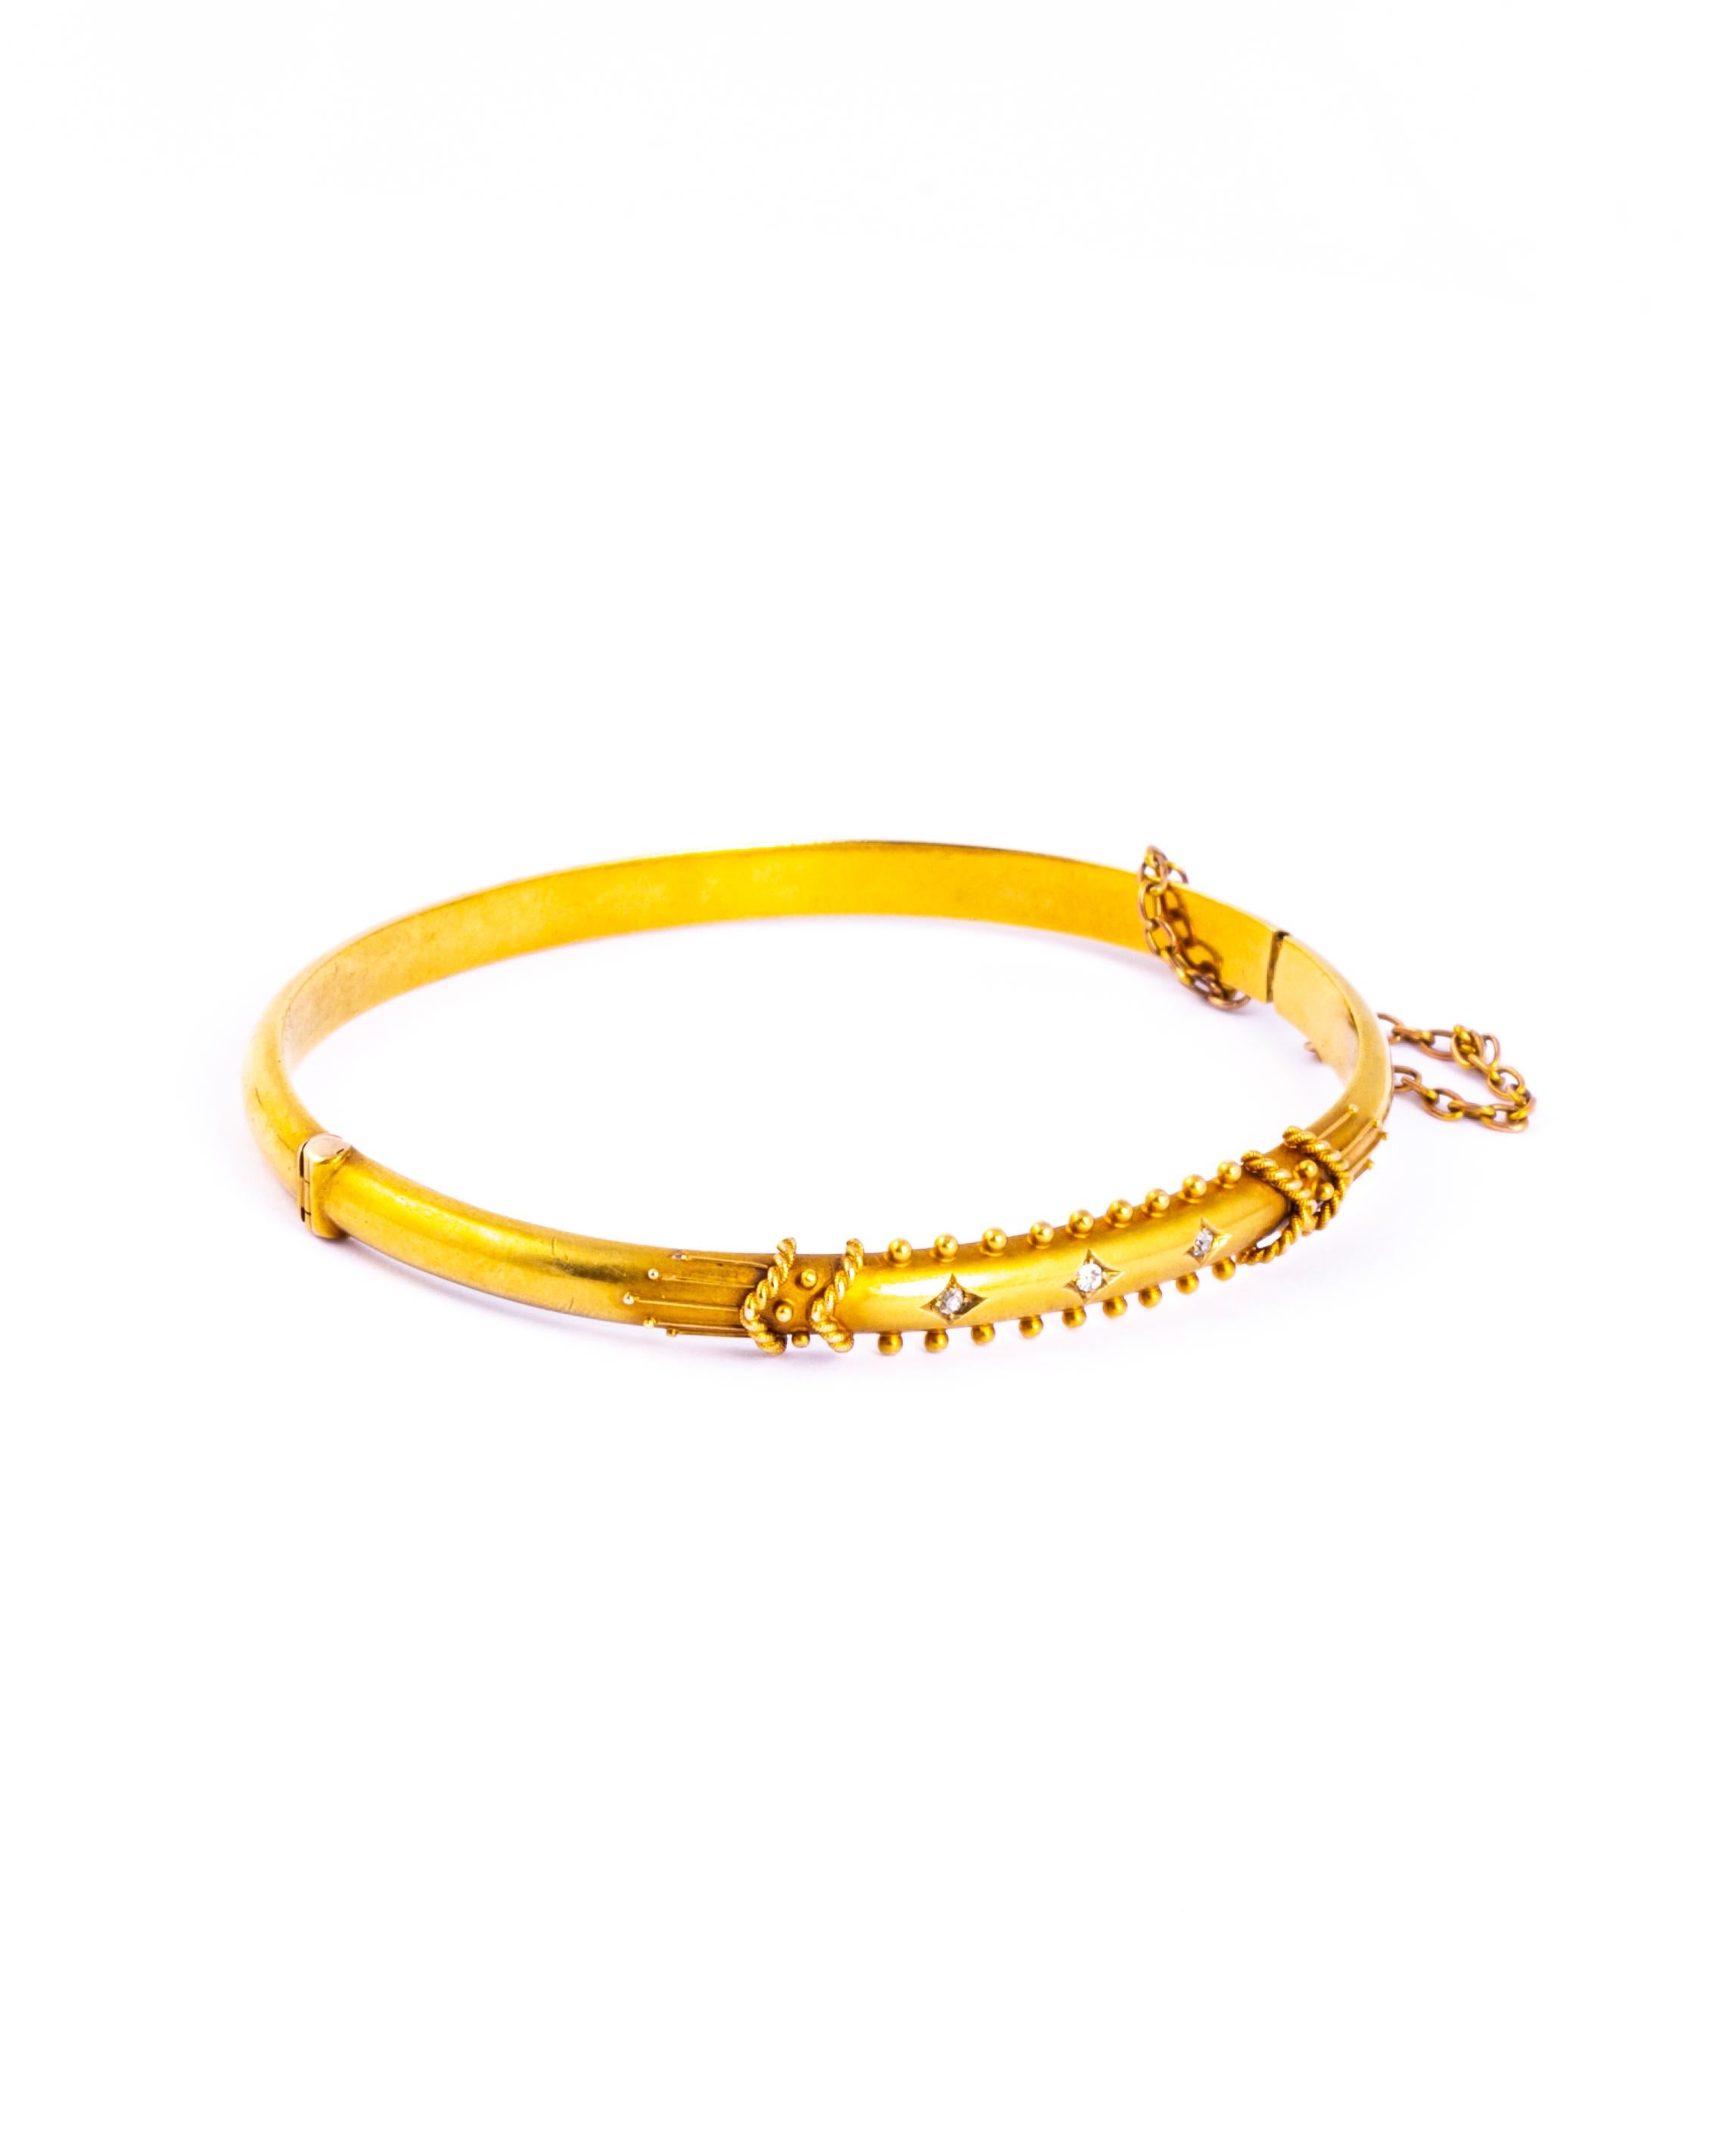 The 15 carat gold is bright and the bangle has so much detail. The central panel holds three round cut diamonds. Either side of the panel is orb detail and two chevron style rope twists either end. The bangle comes in original box. 

Inner Diameter: